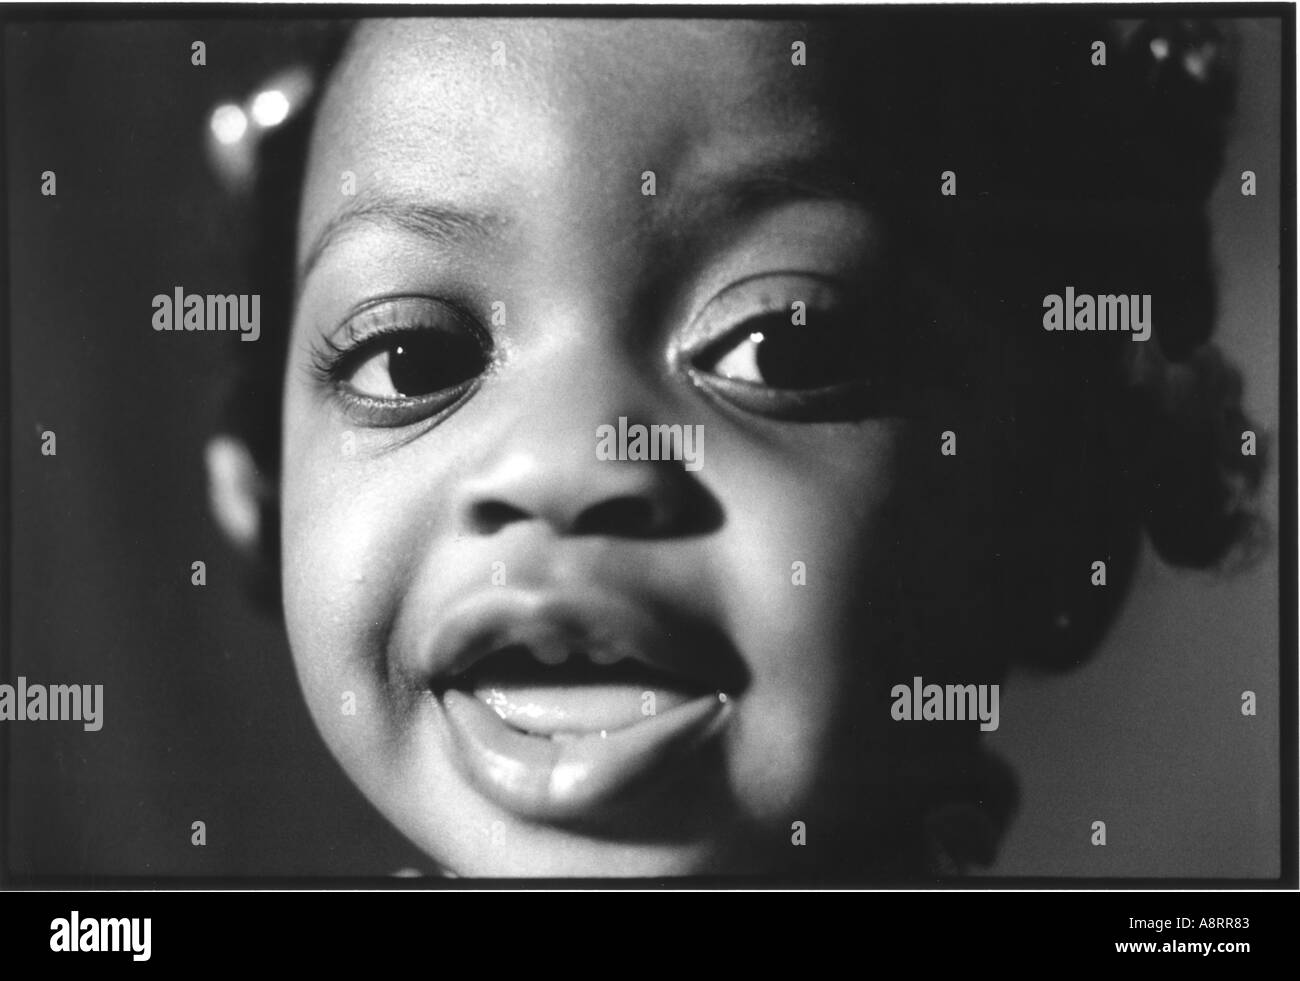 Close up portrait of young African American girl smiling Stock Photo